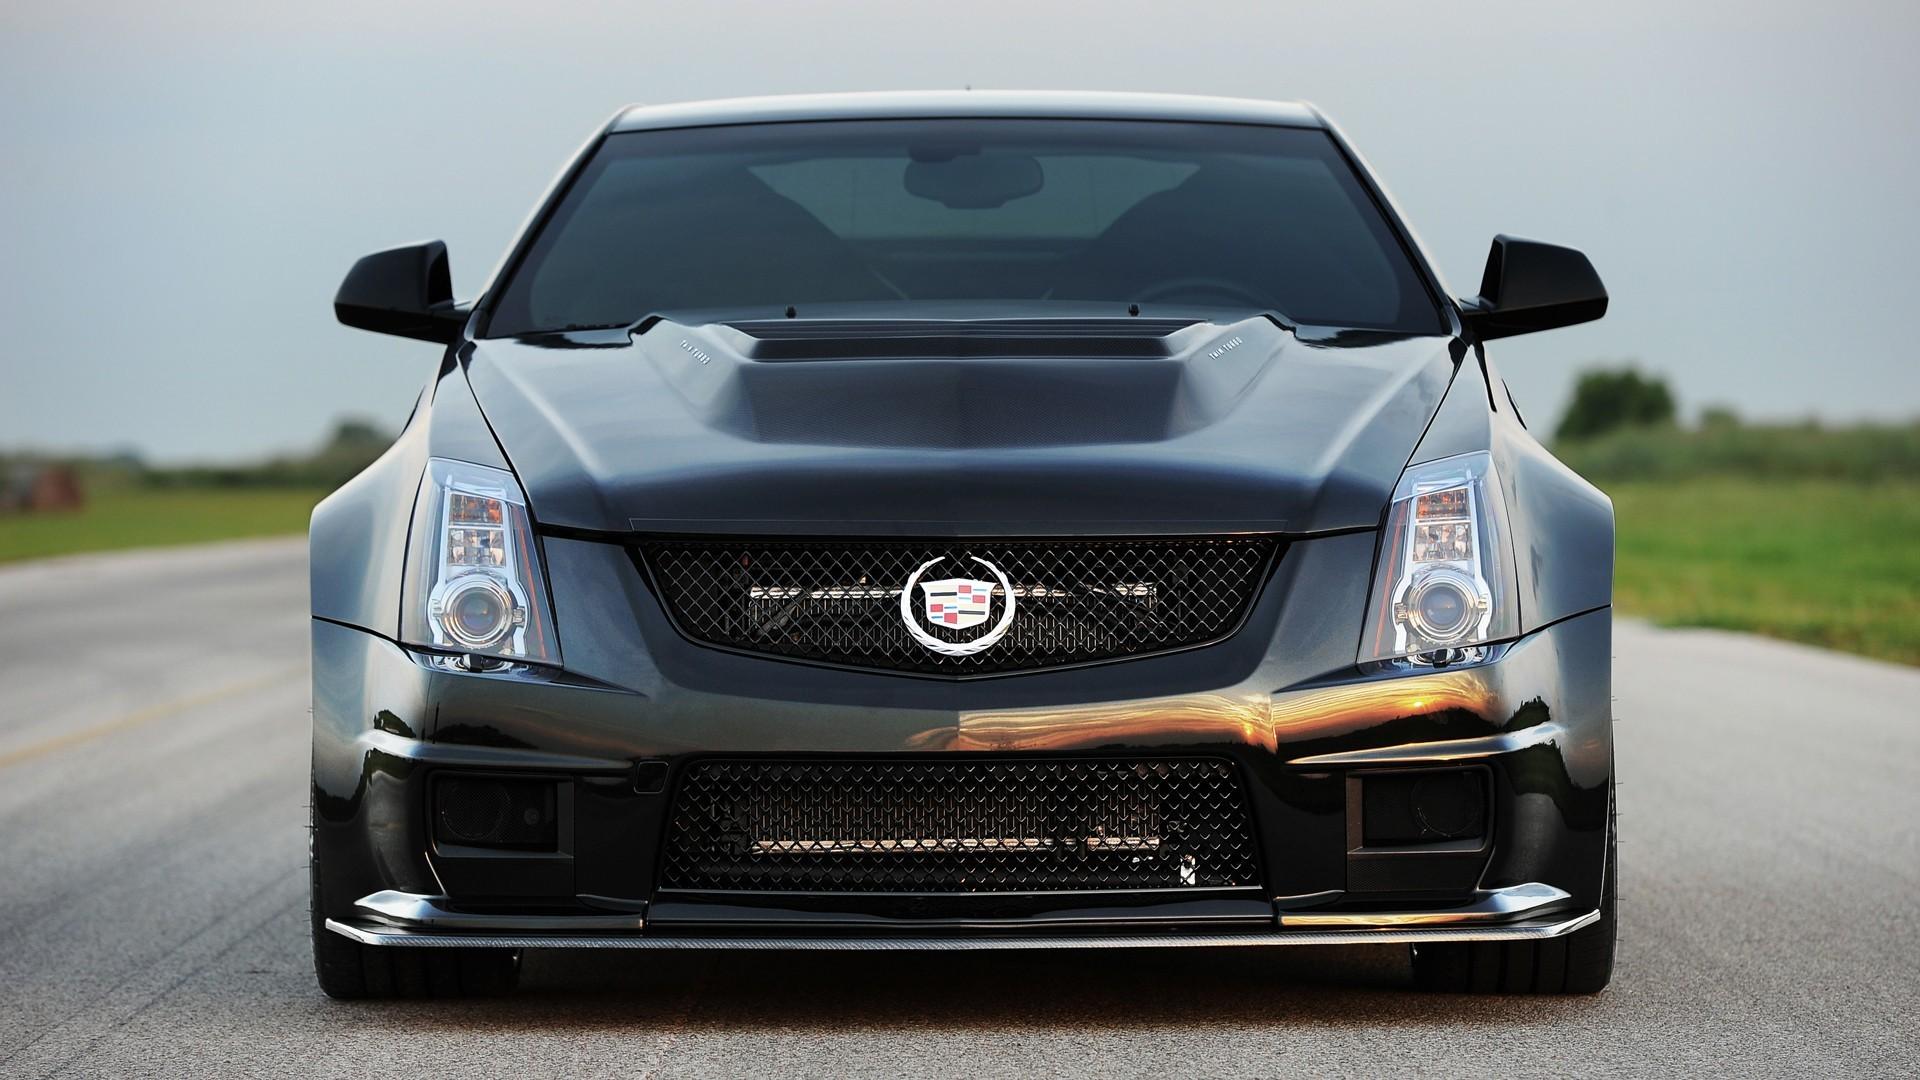 Cars hennessy cts-v cadillac coupe modified tuned car wallpaper ...